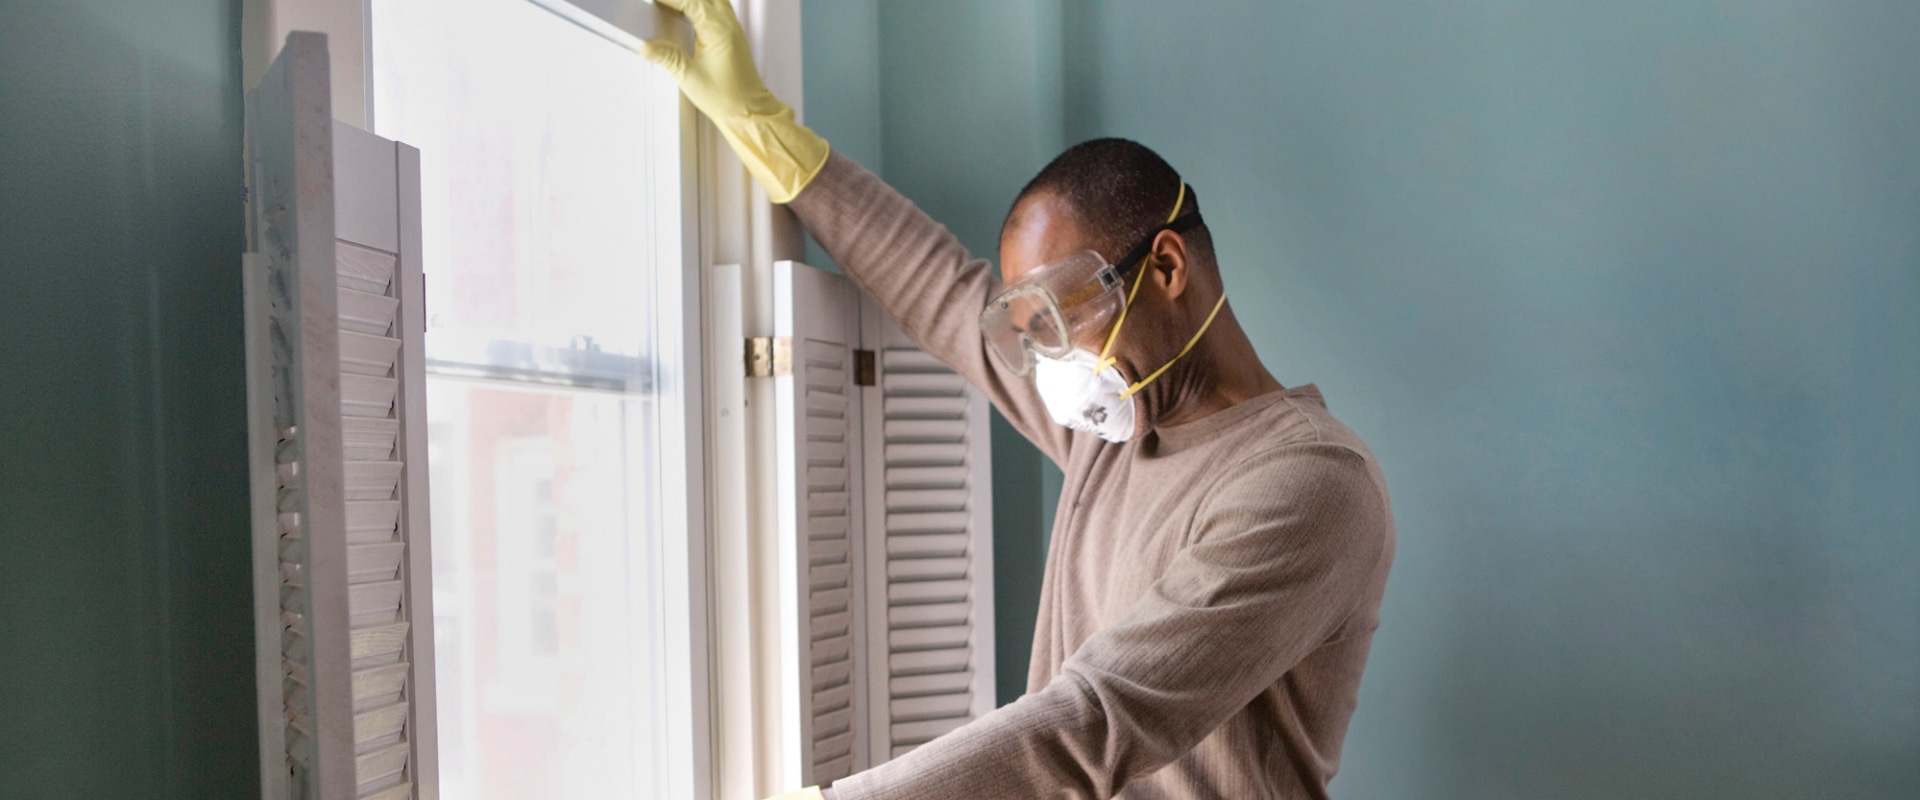 What should i wear when cleaning black mold?